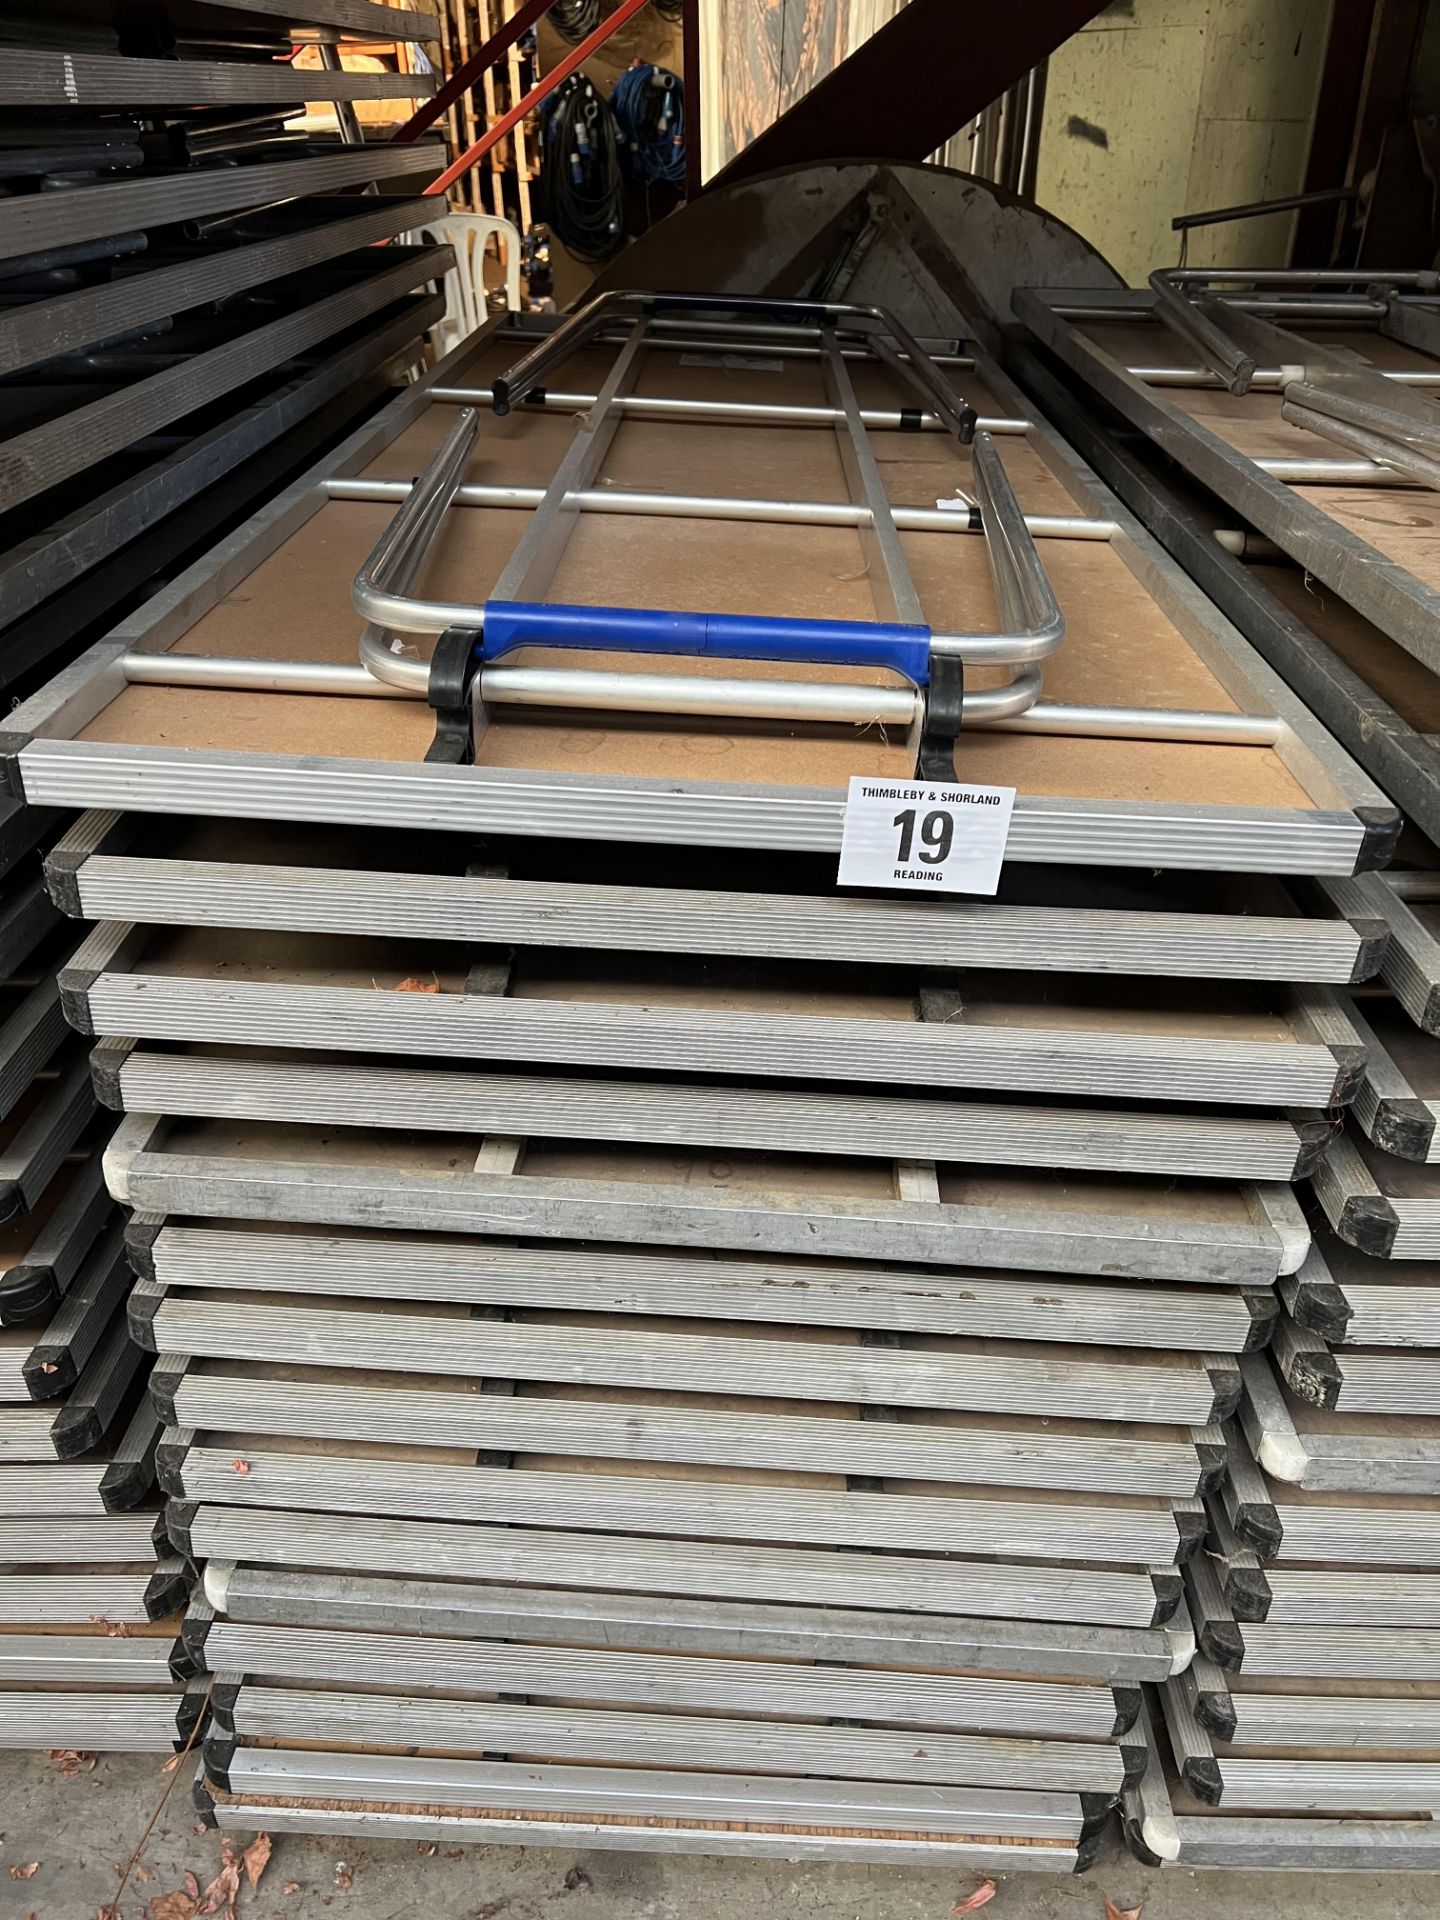 15 Gopak 6ft trestle tables with folding legs and melamine top. This lot is subject to VAT. - Image 2 of 2